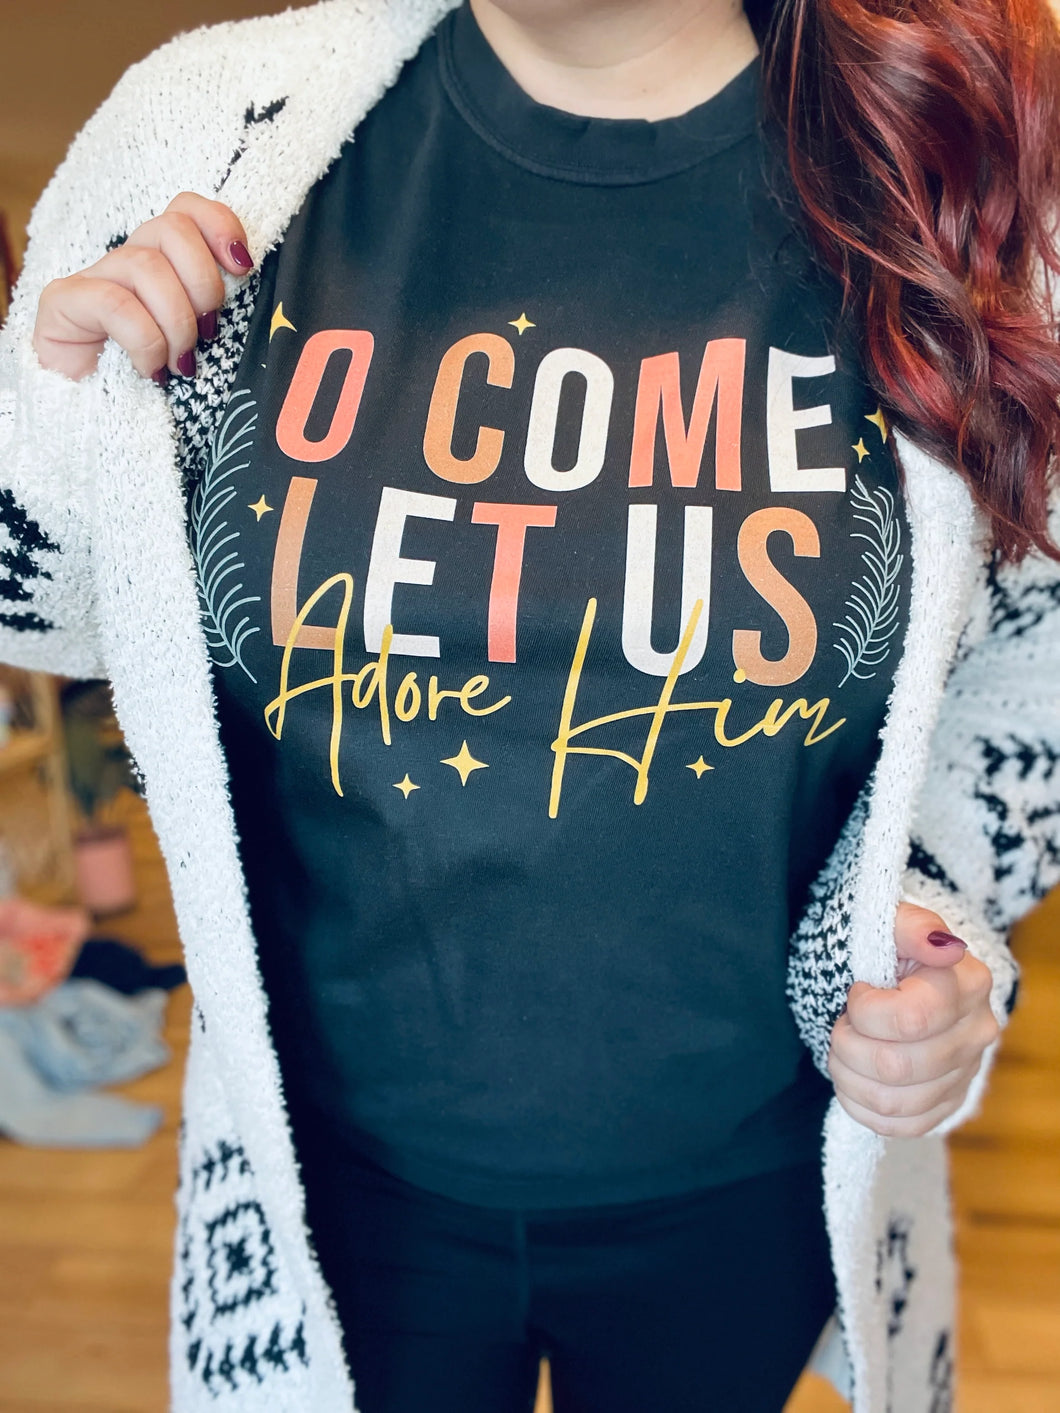 LET US ADORE HIM TEE